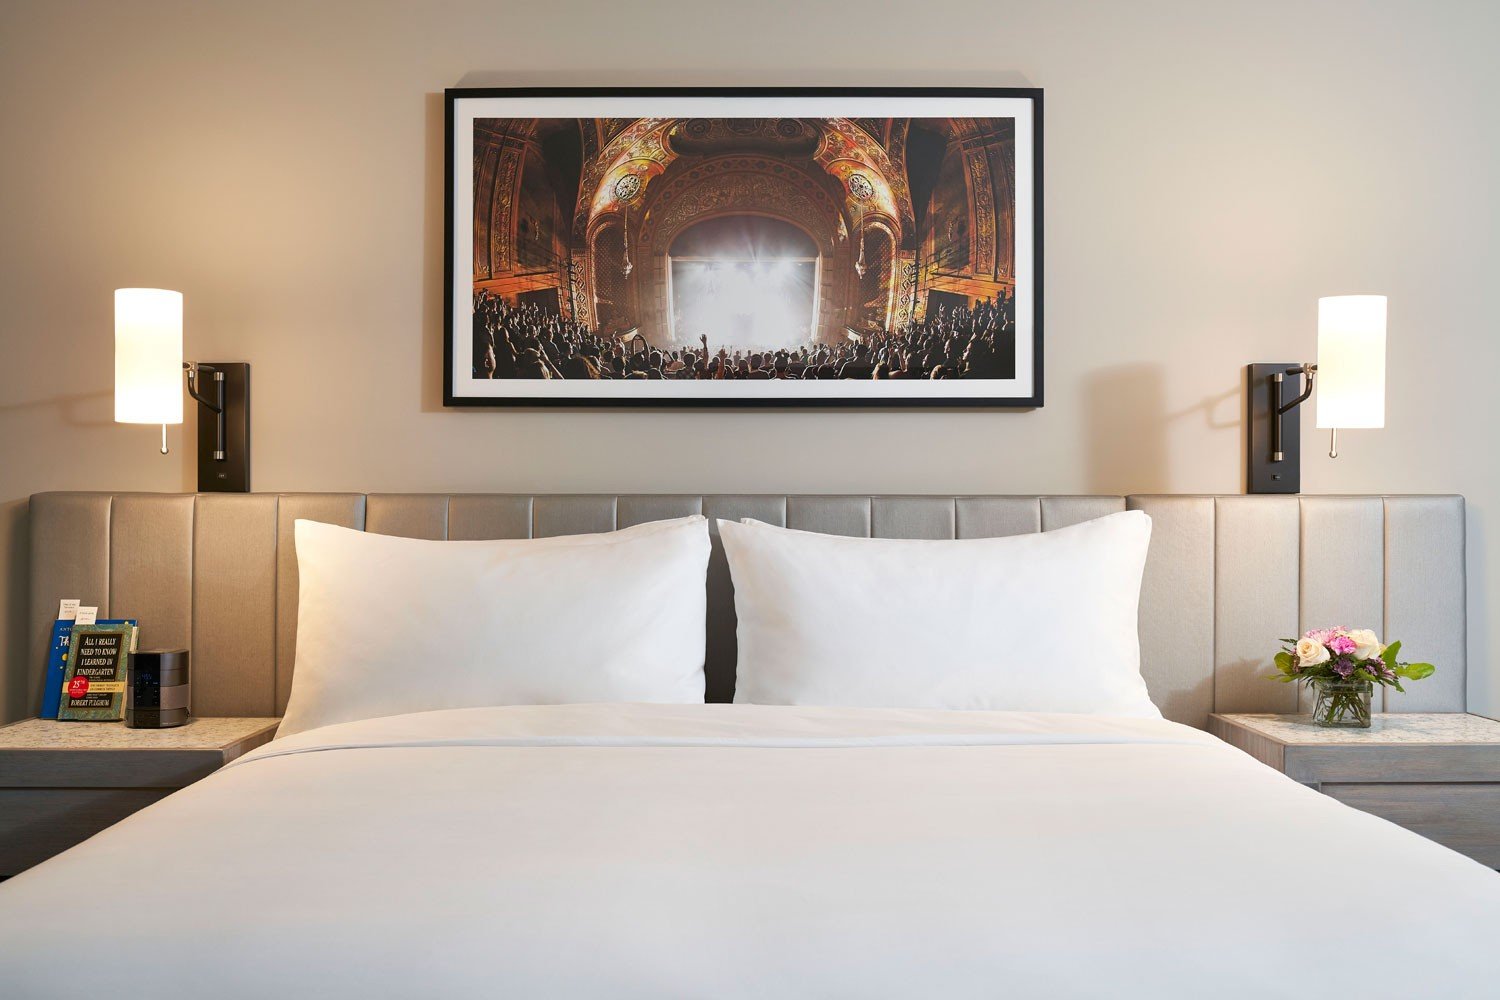 Archer Hotel Redmond - Classic King bed with artwork